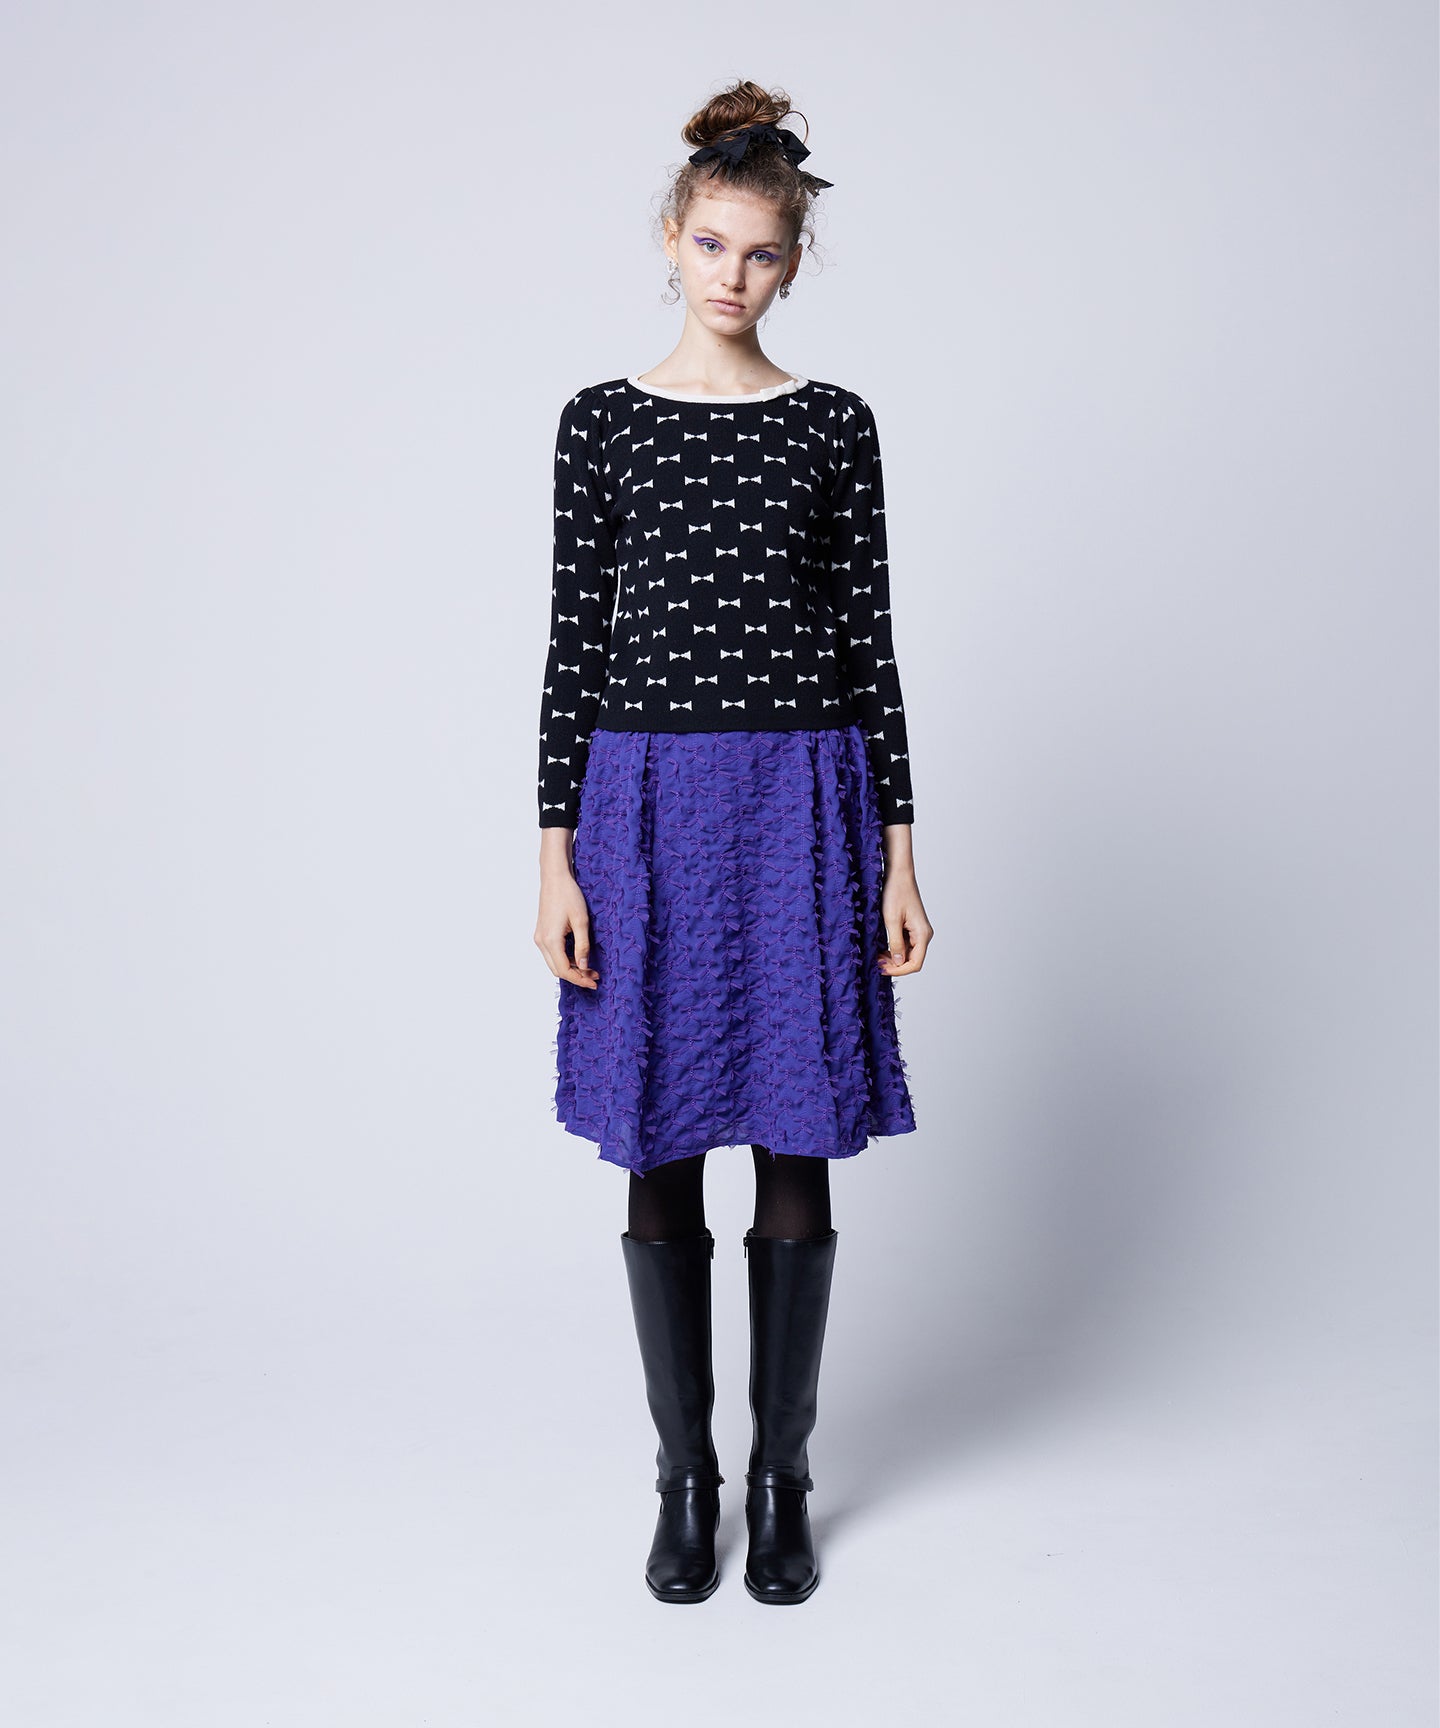 BOWTIFUL KNIT – TOCCA OFFICIAL SITE